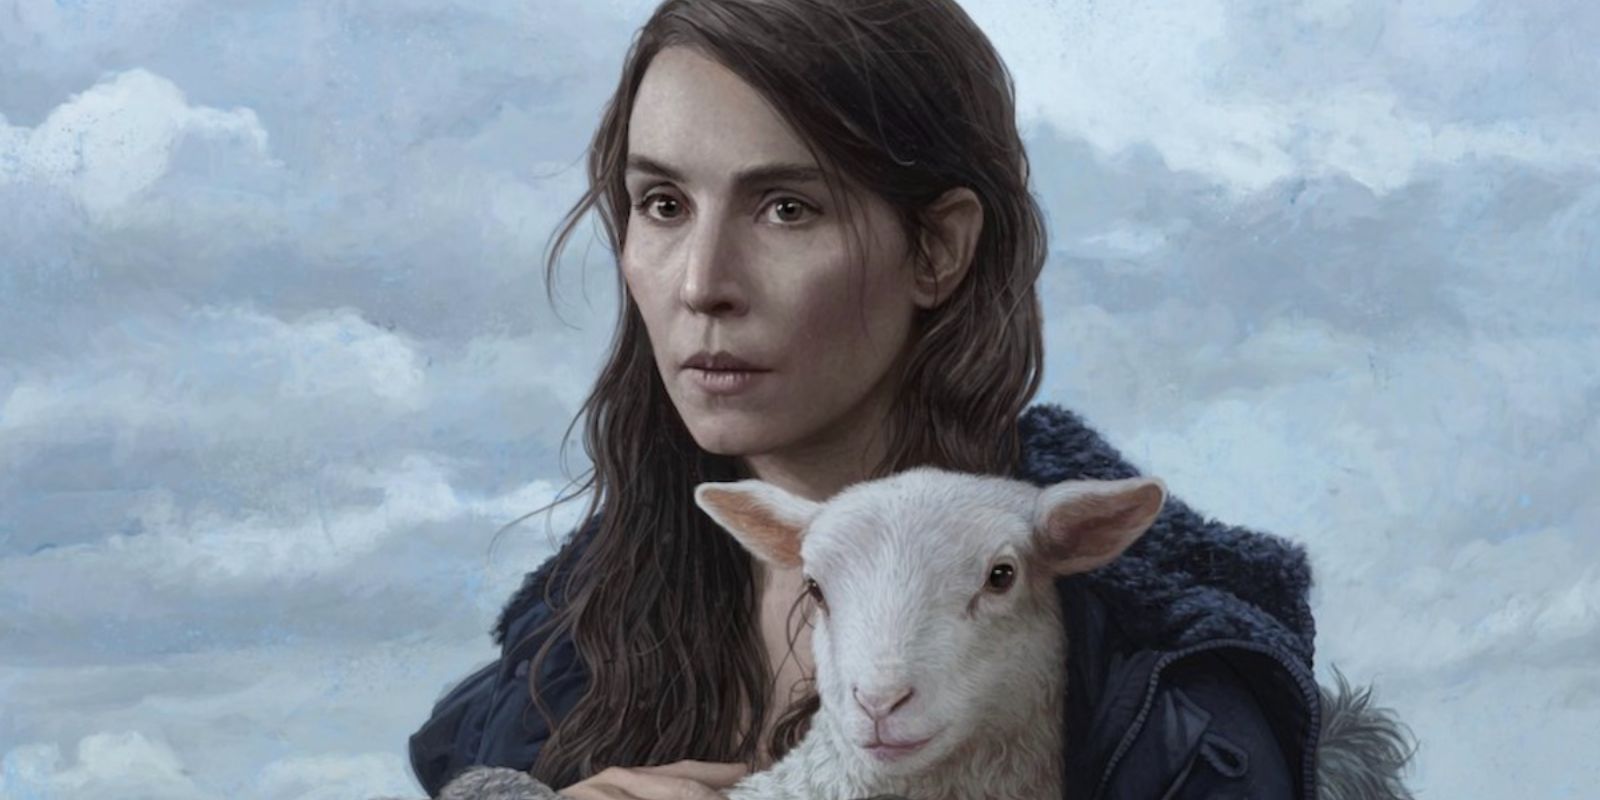 Noomi Rapace holding a lamb in movie poster image